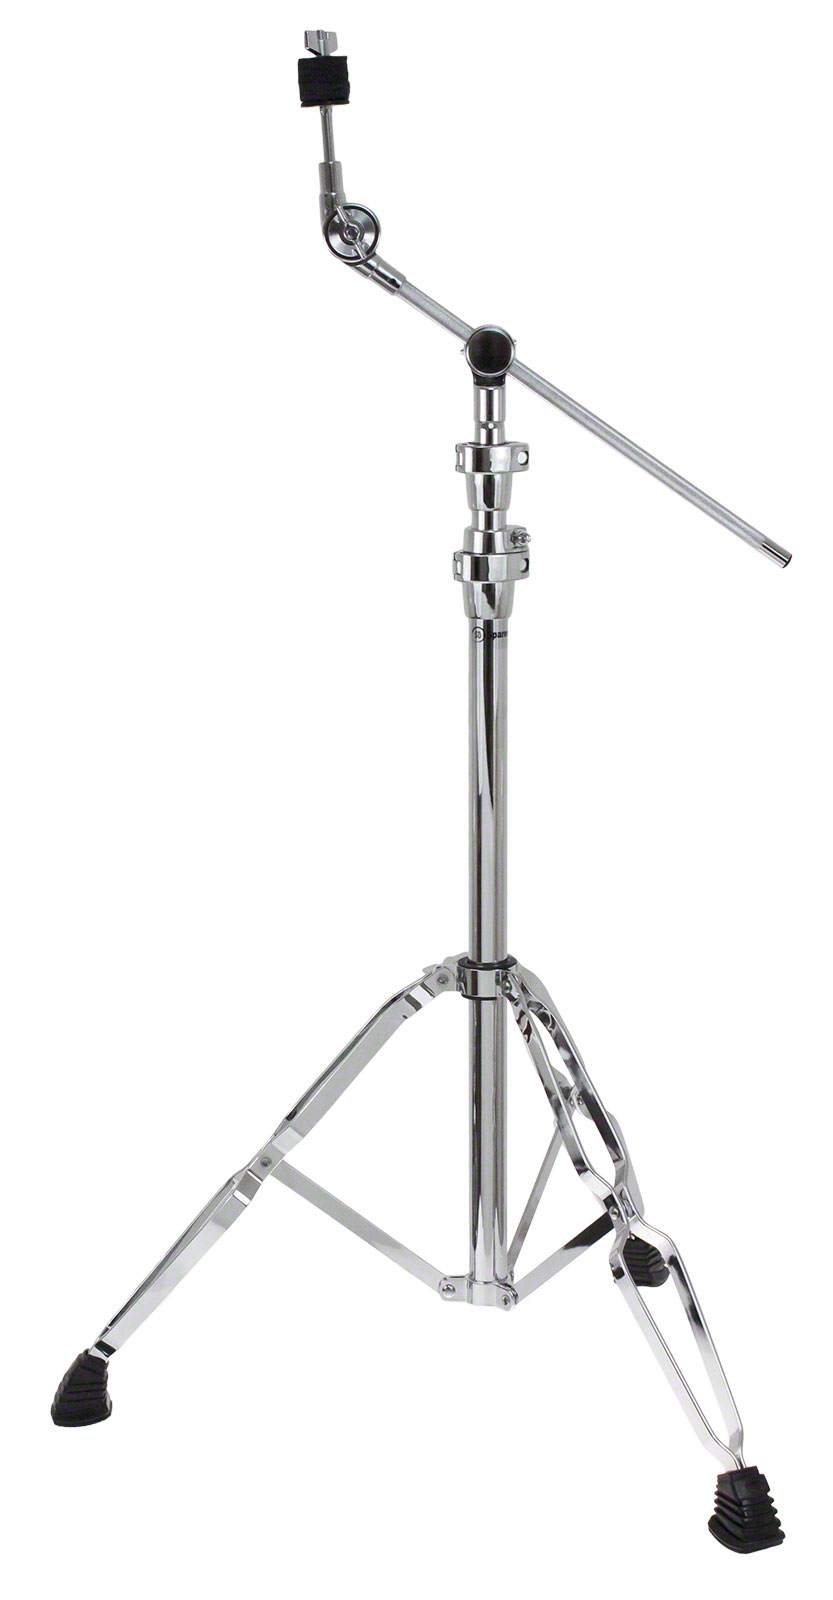 SPAREDRUM HCS2B - PRO CYMBAL BOOM STAND DOUBLE-BRACED LEGS